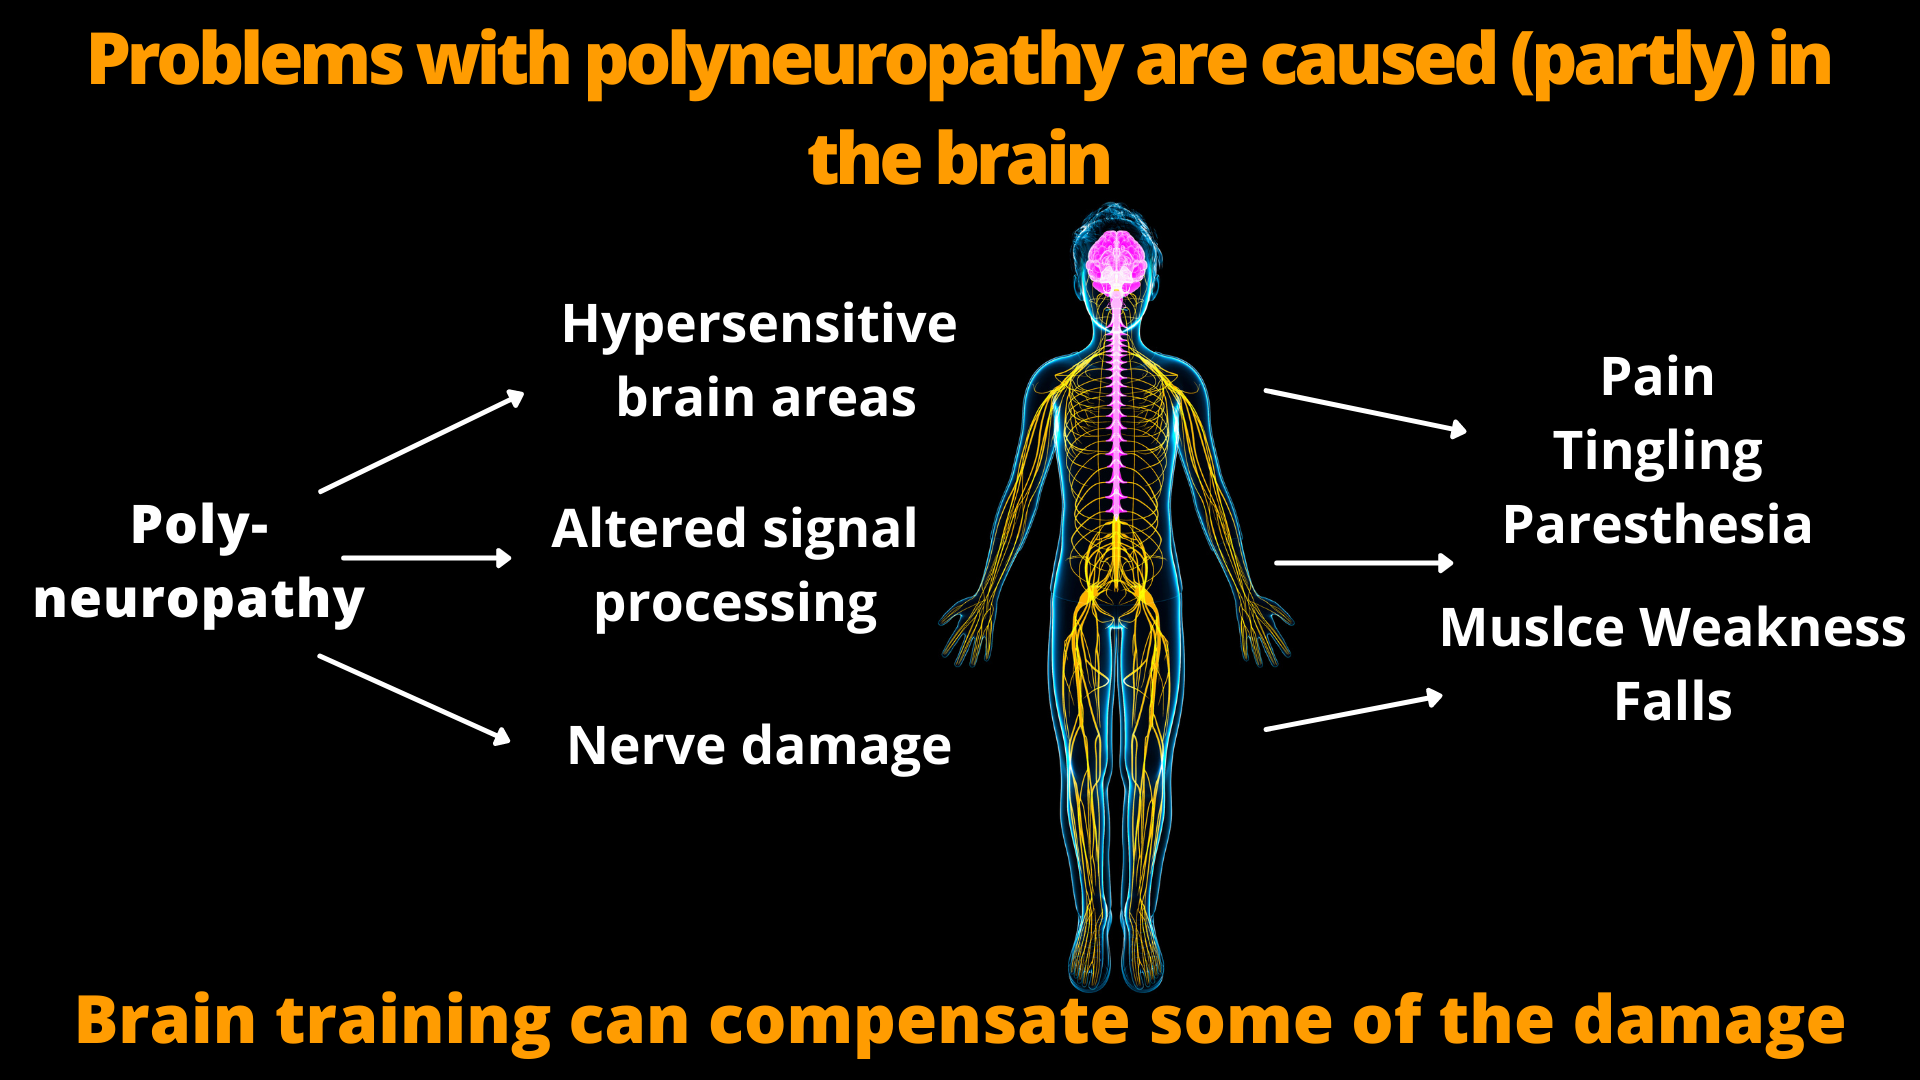 Training the nervous system can compensate for problems with polyneuropathy